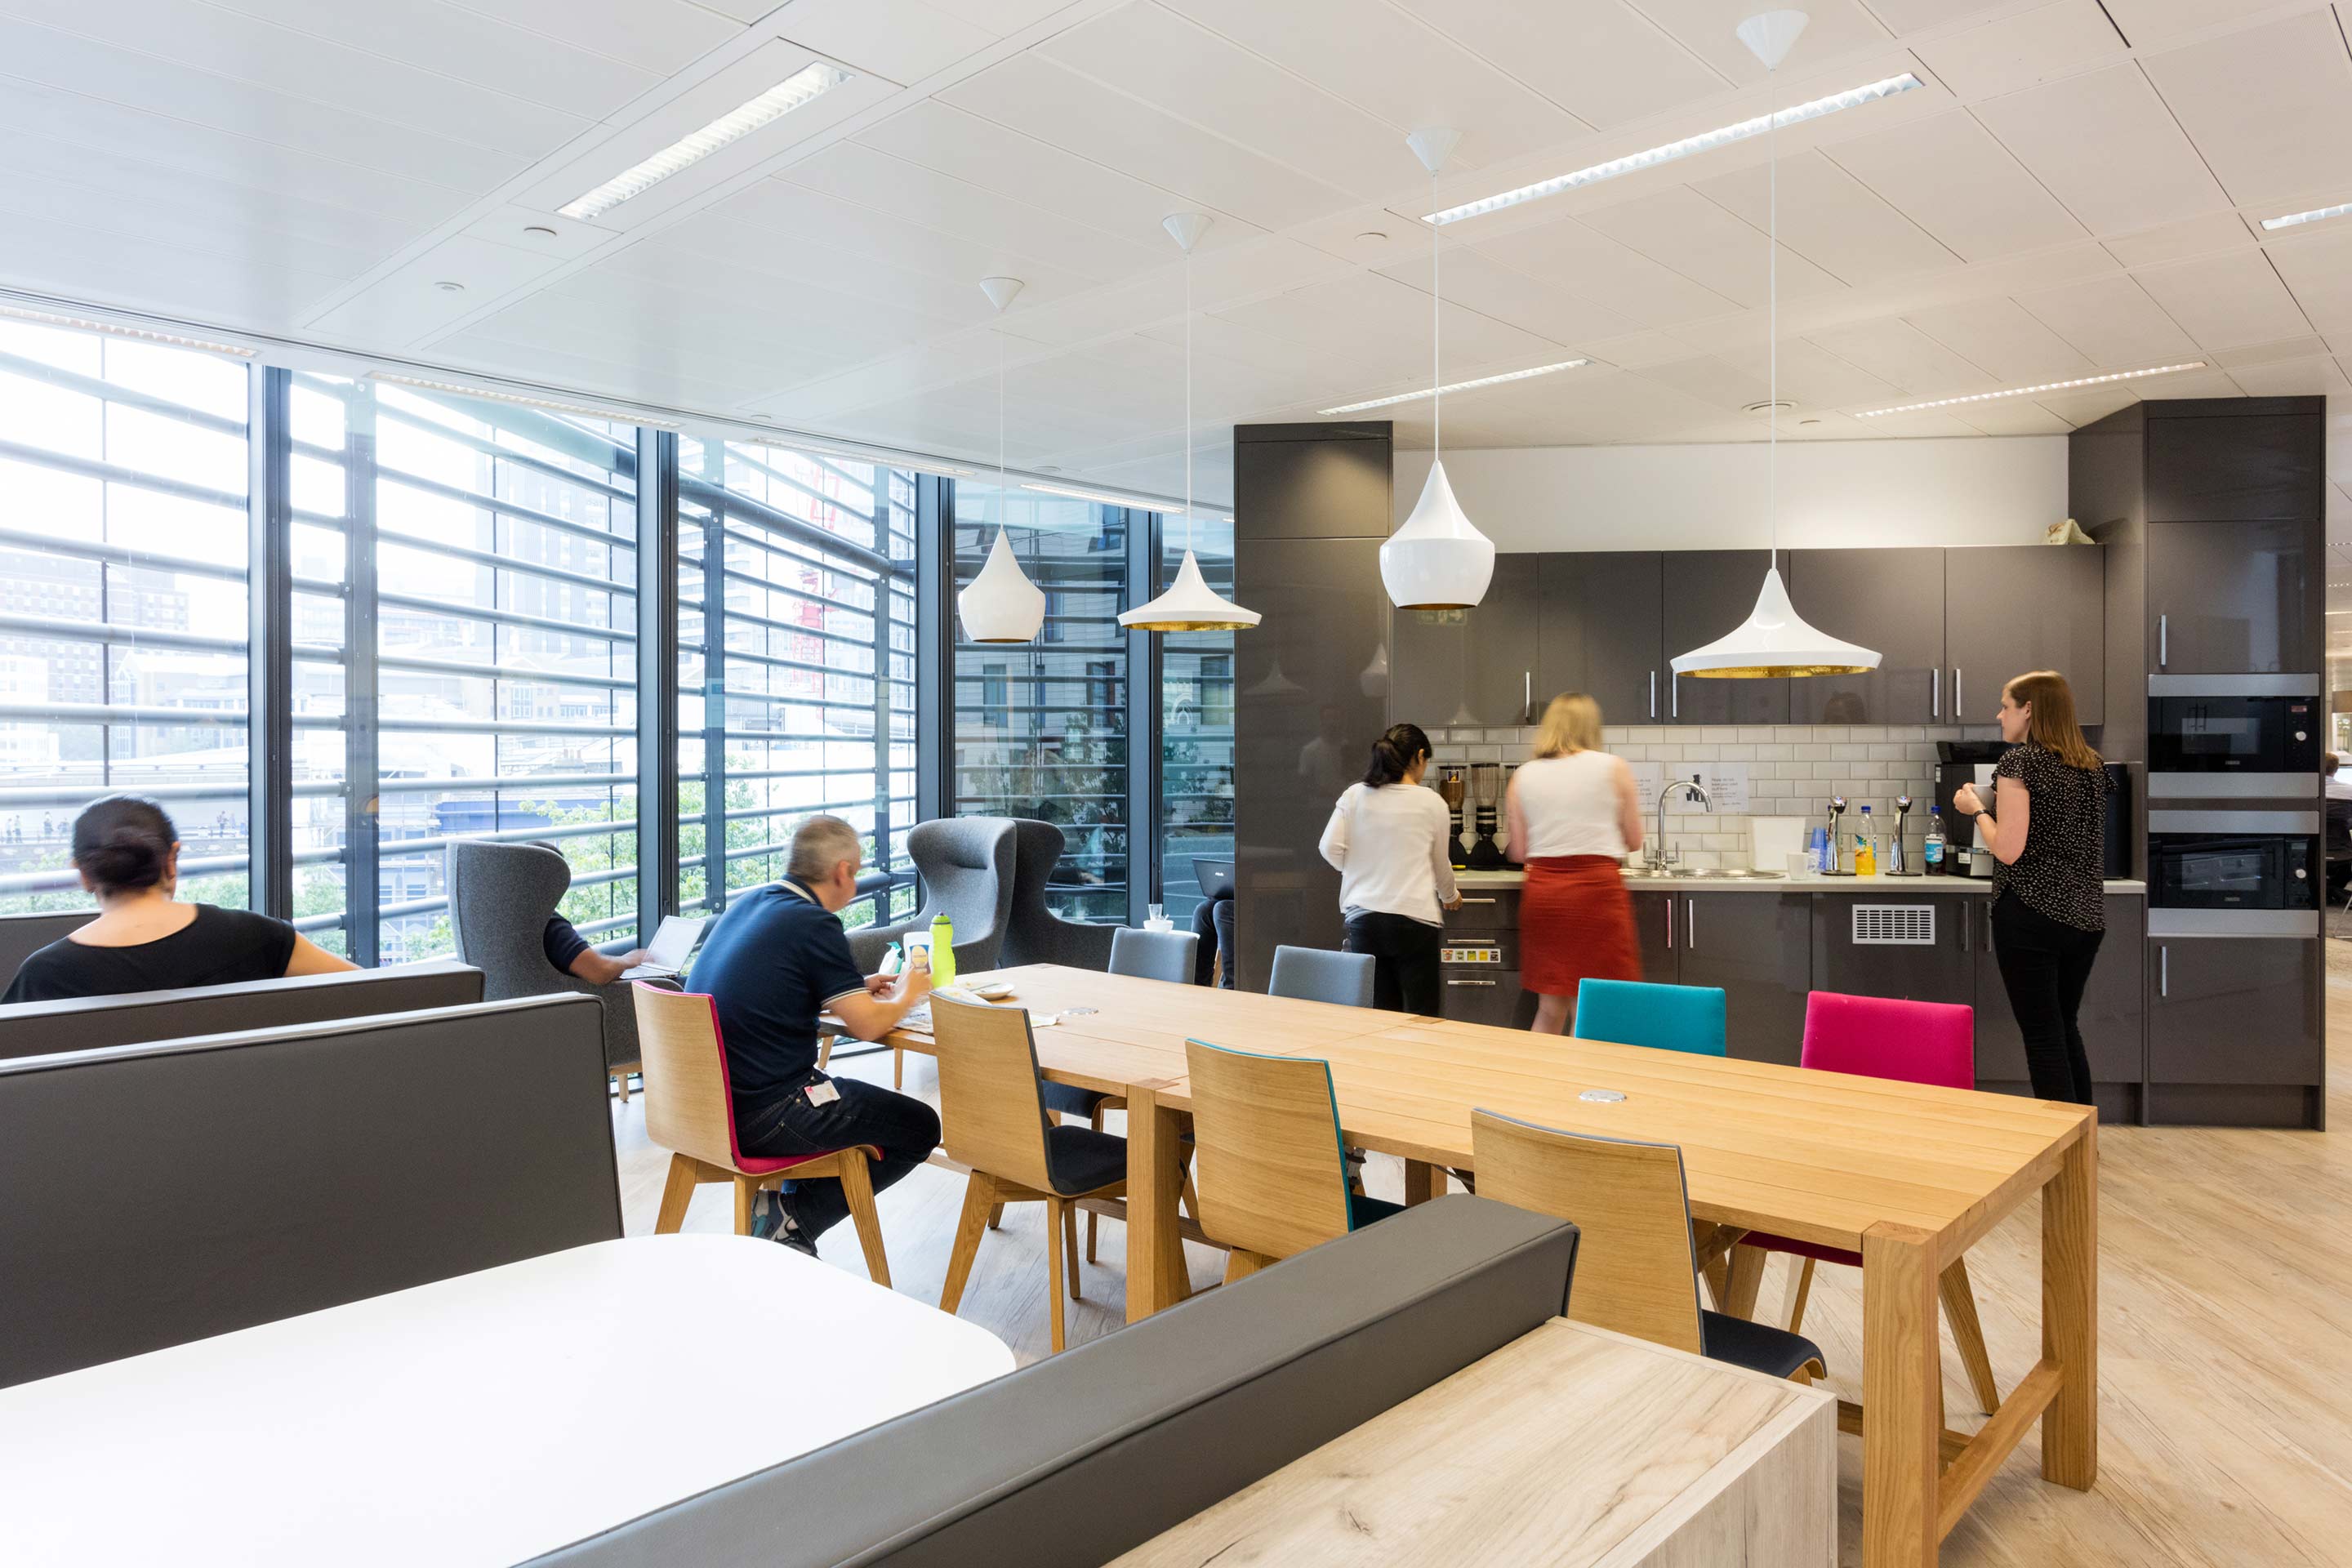 Bench seating and a tea point at Kantar TNS' workplace